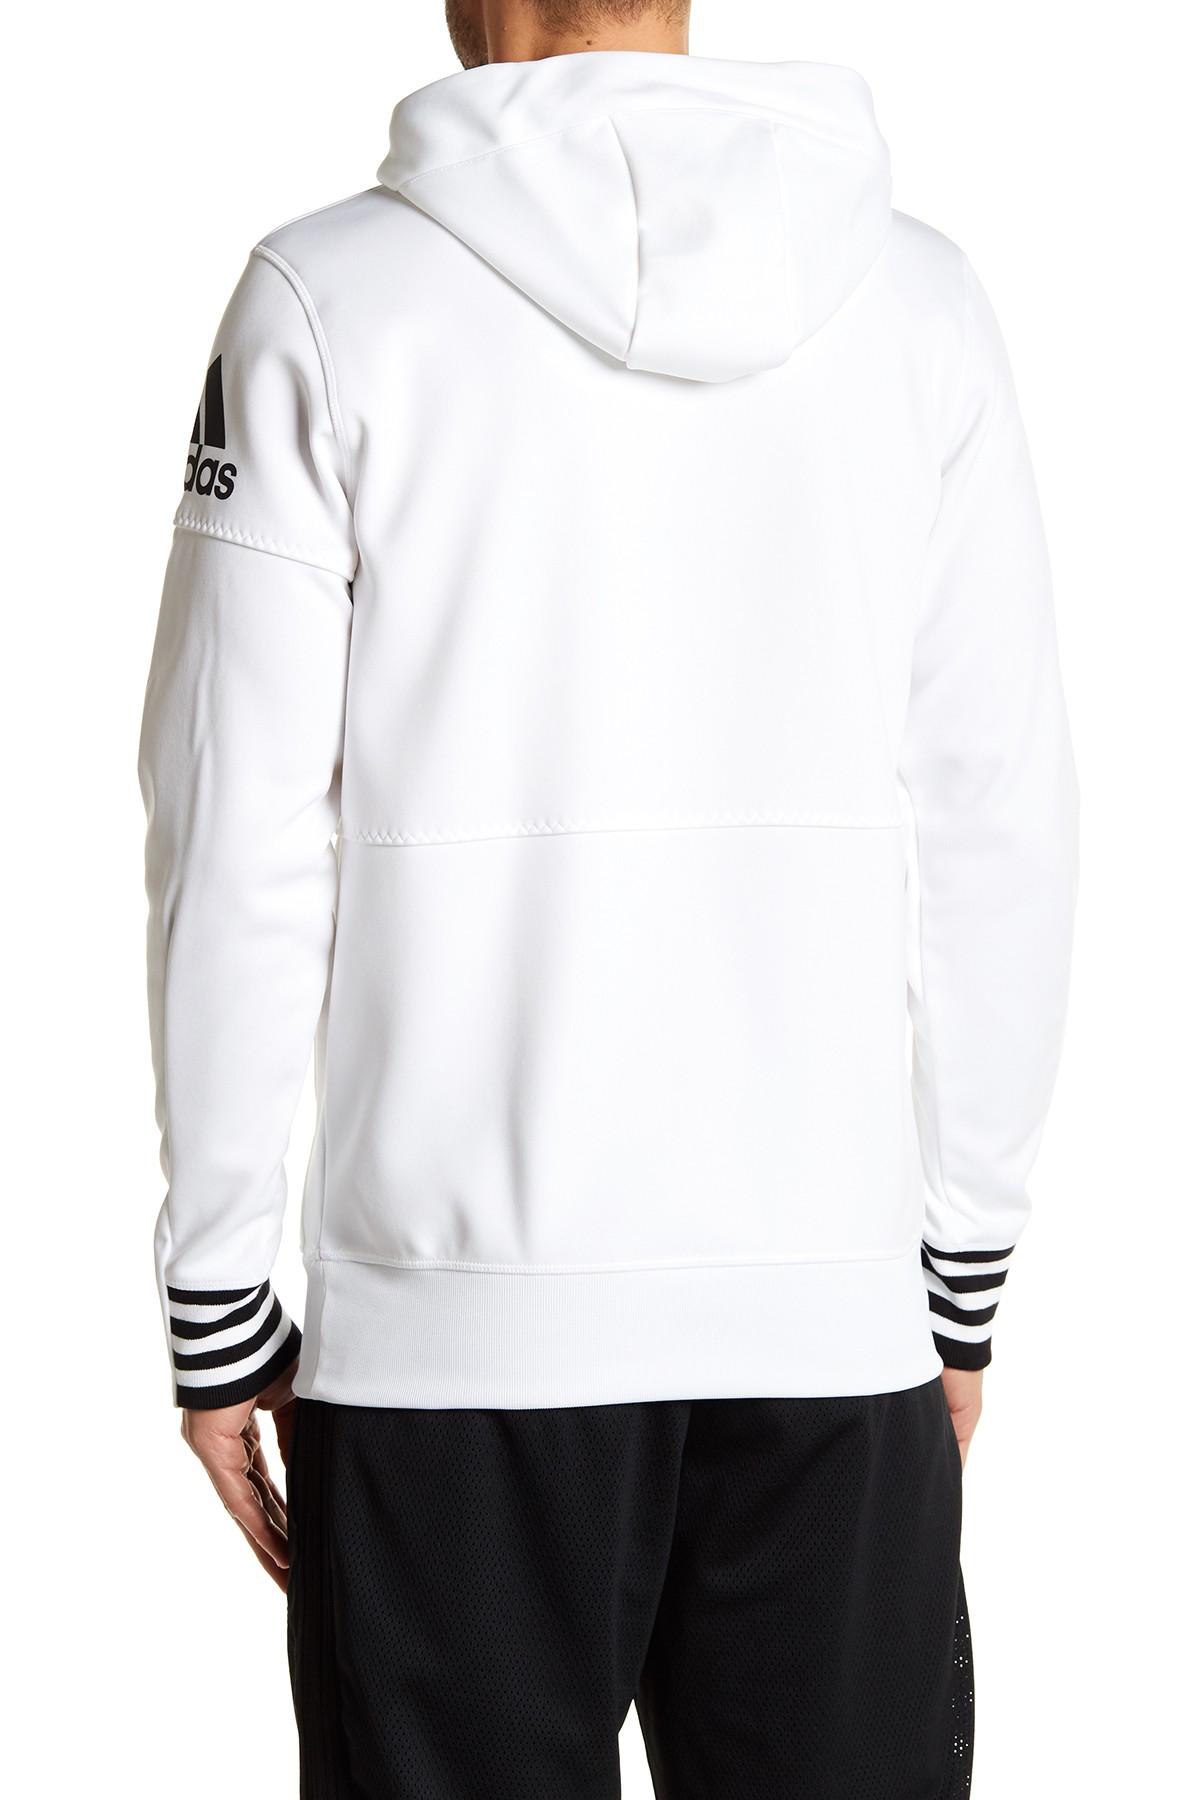 Lyst - Adidas Originals Solid Long Sleeve Hoodie in White for Men